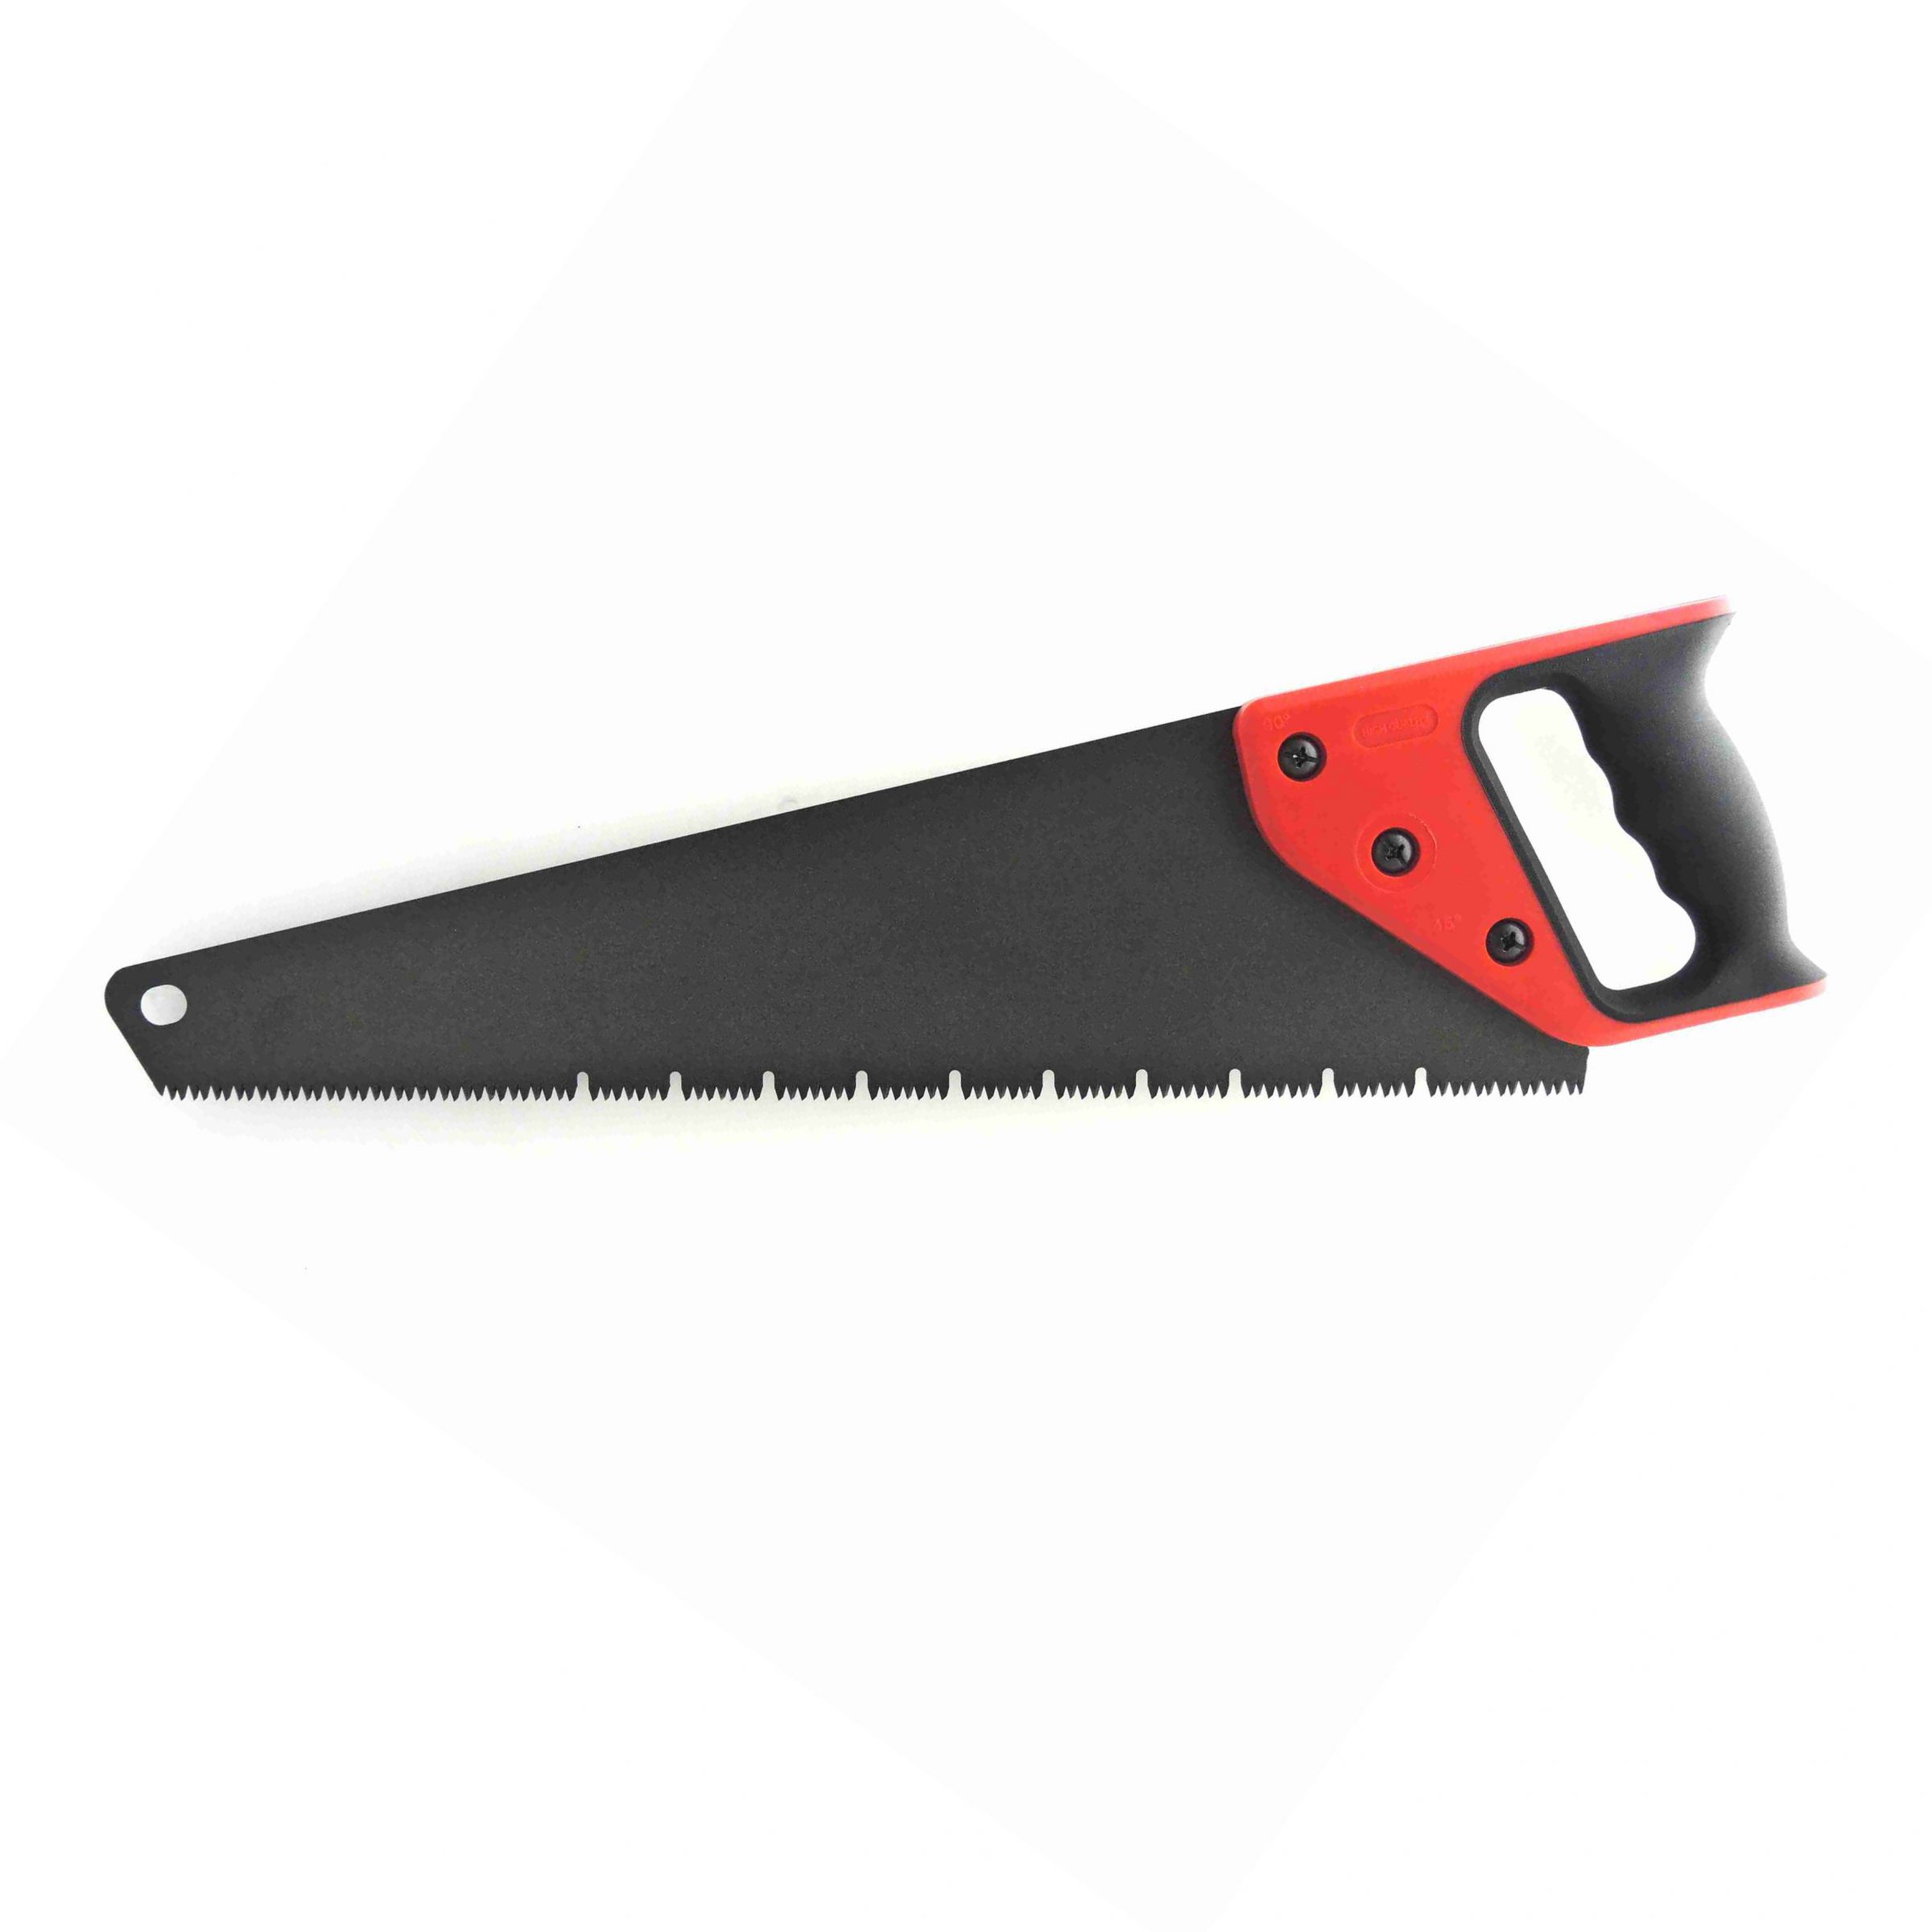 Low Friction Coated Hand Saw, Western Hand Saw | Soteck - A ...